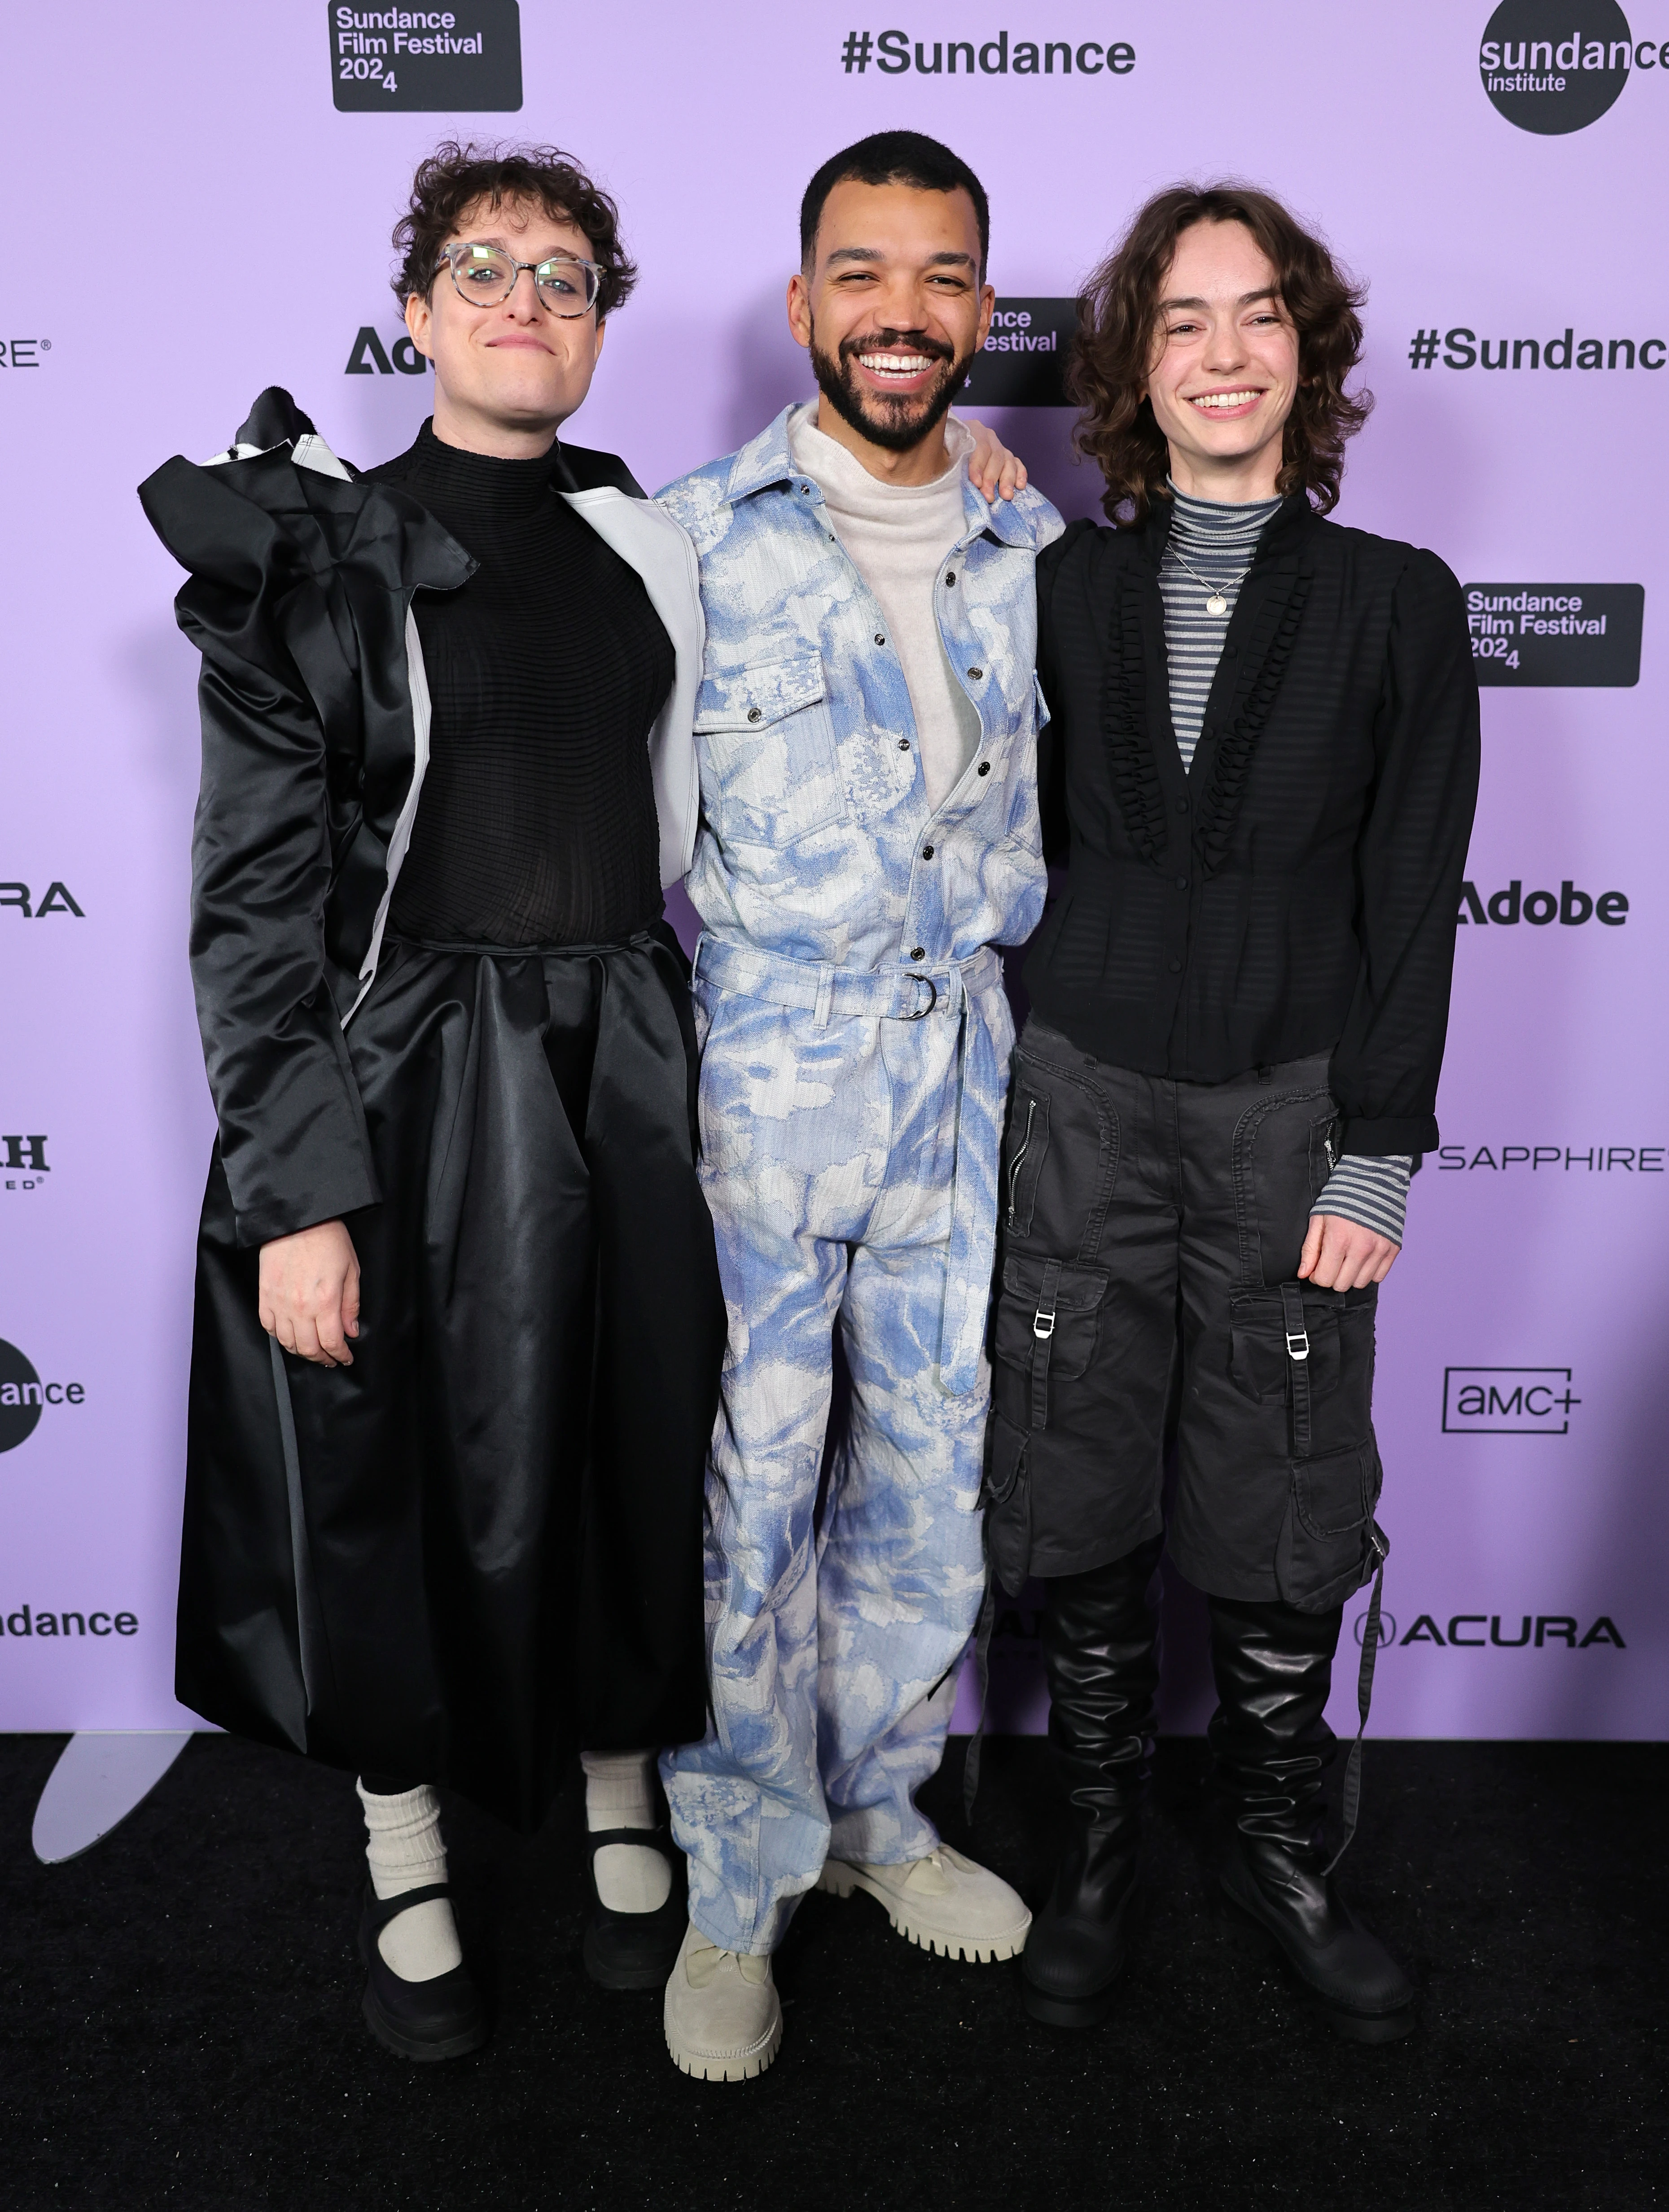 Jane Schoenbrun, Justice Smith and Brigette Lundy-Paine 